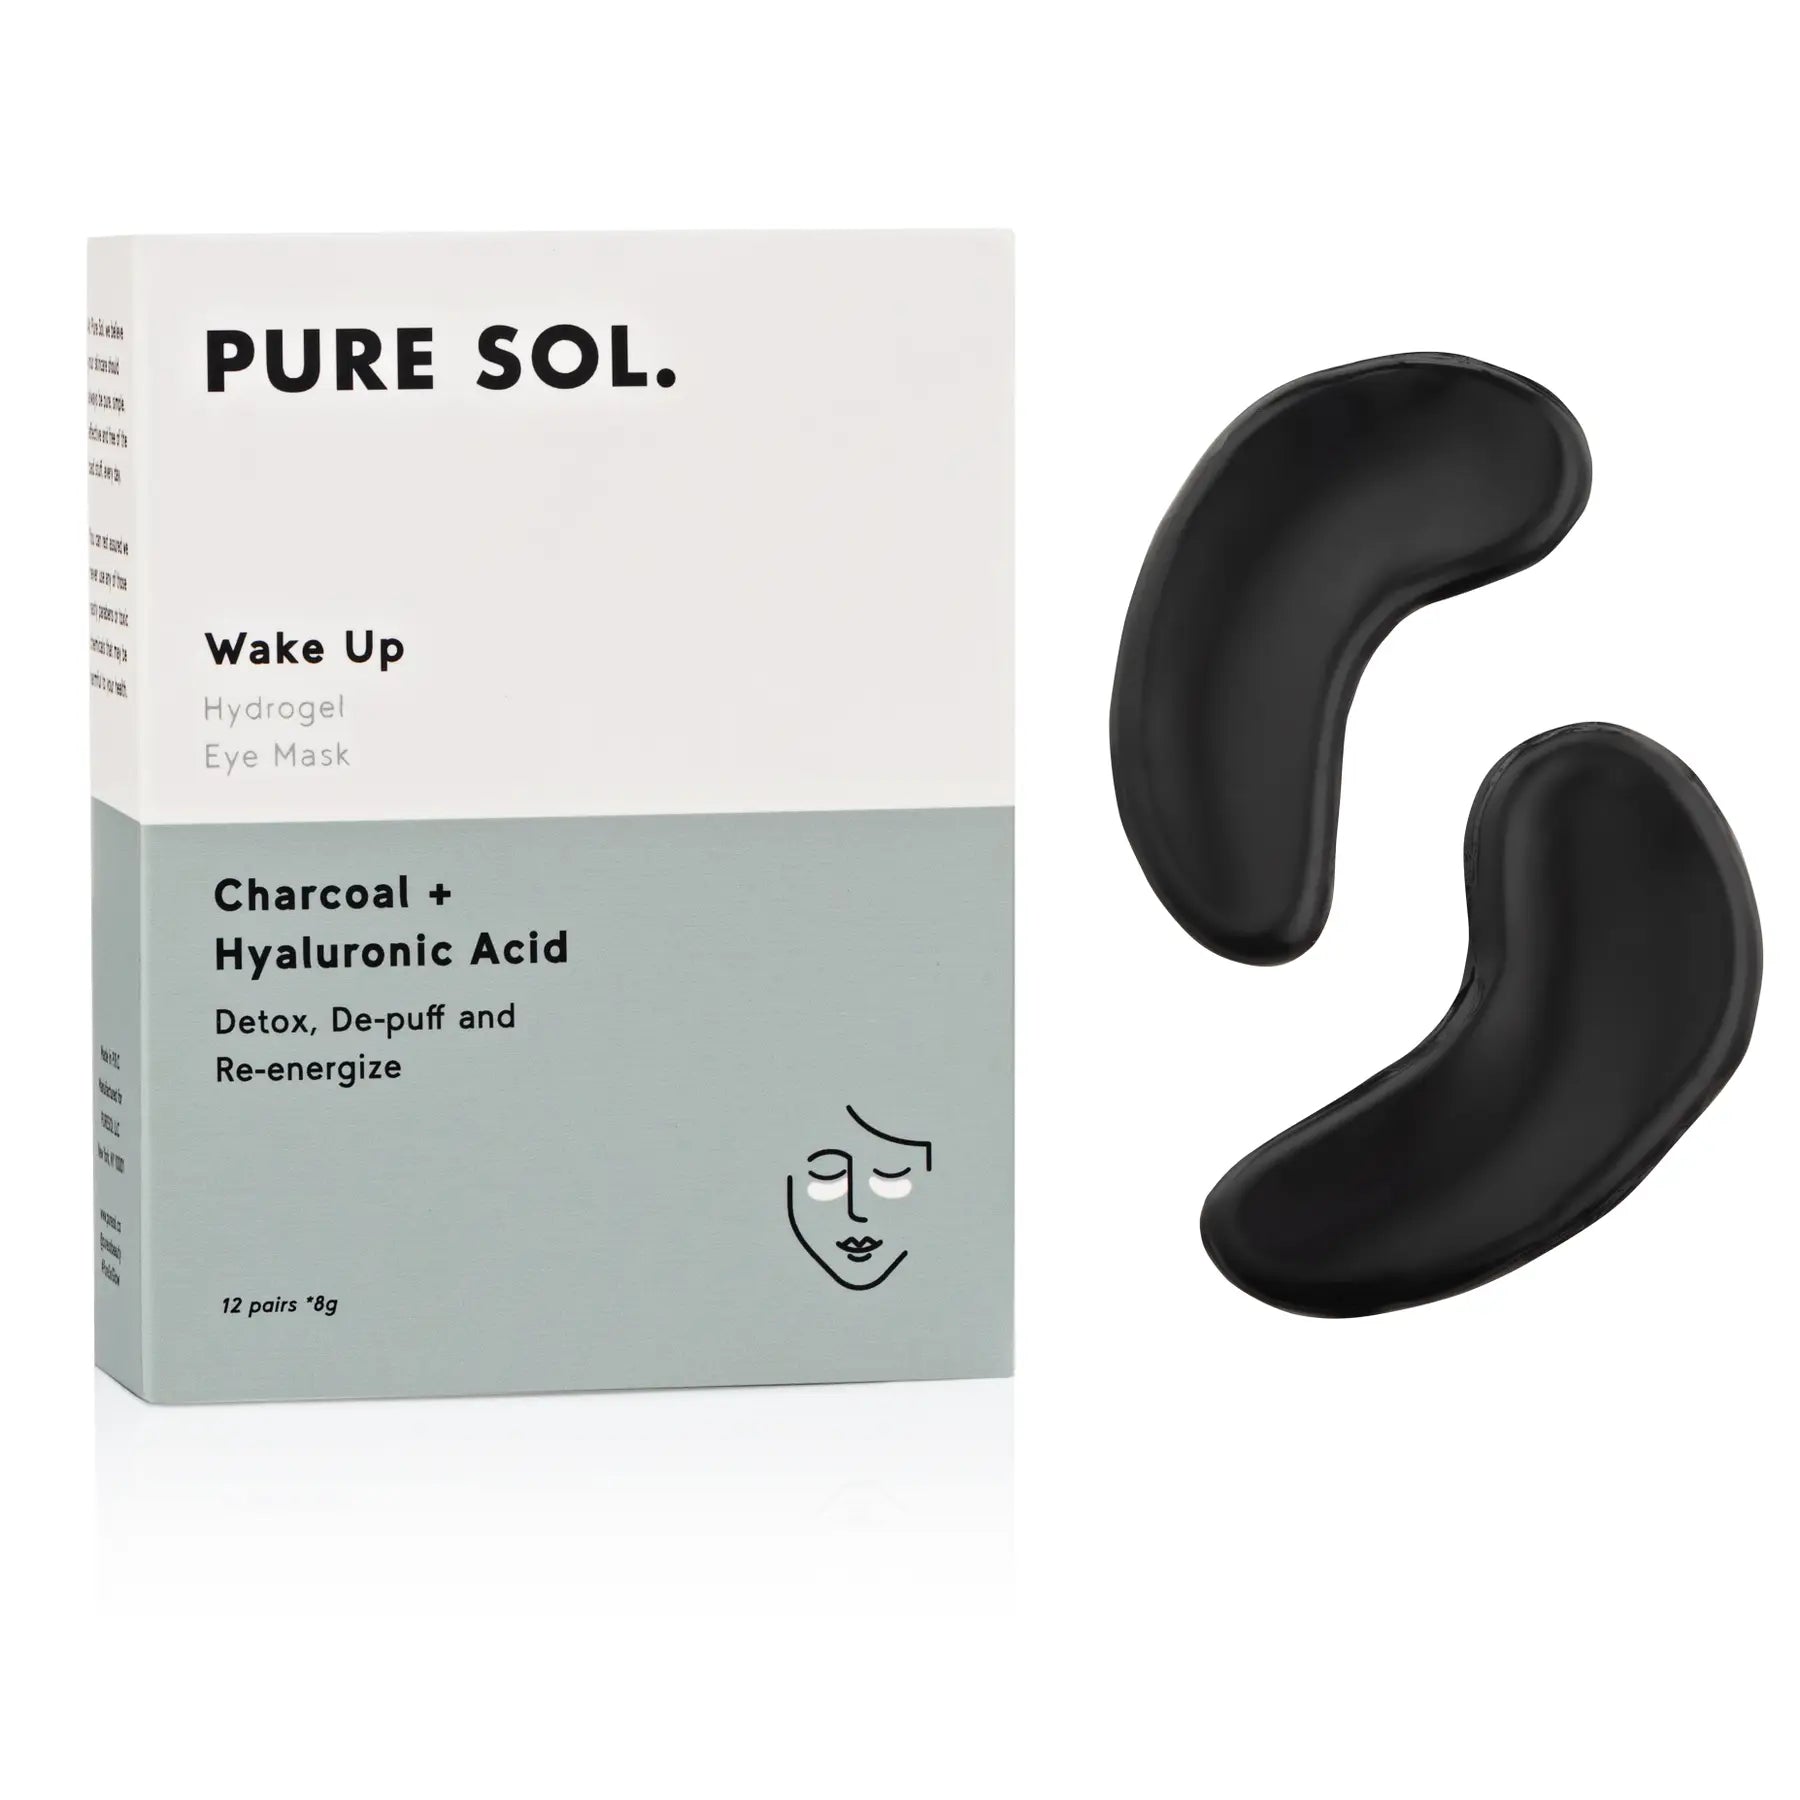 Wake Up Hydrogel Eye Patch Charcoal + Hyaluronic Acid